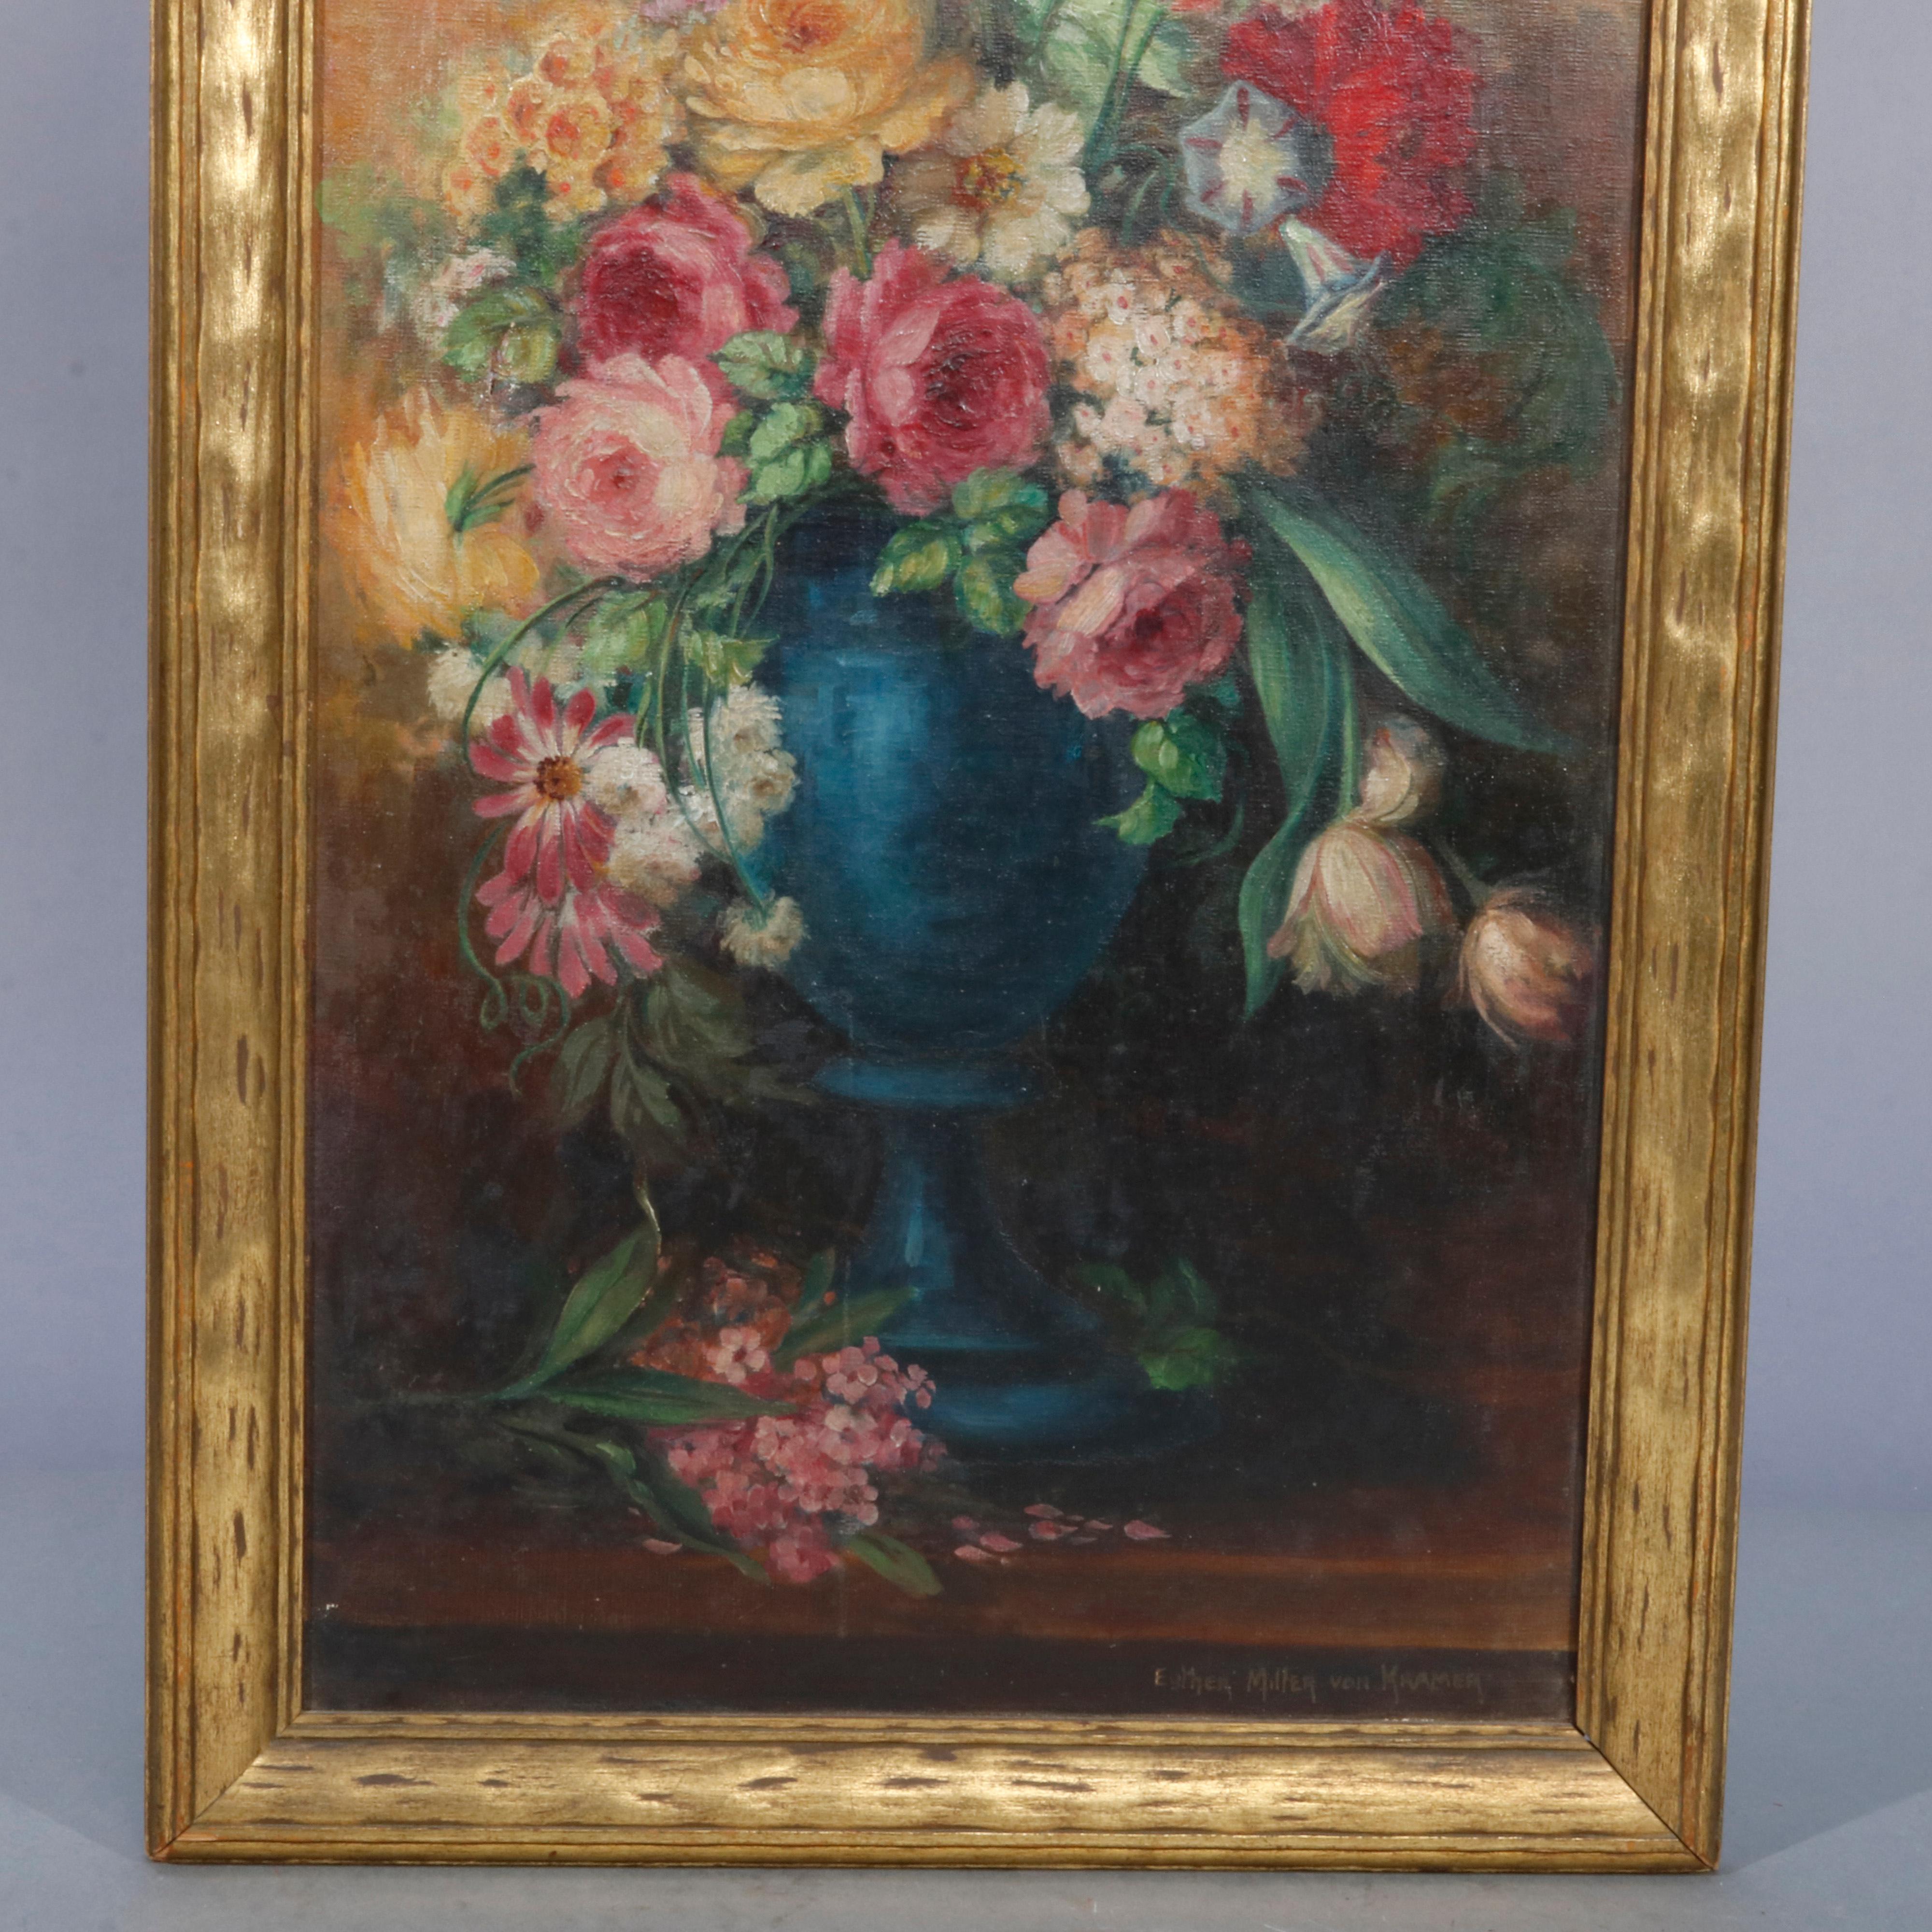 An antique painting offers Victorian continental oil on canvas still life depicting garden flowers in tall blue porcelain pedestal urn vase on tabletop, artist-signed lower right Esther Miller von Kramer, seated in giltwood frame, circa